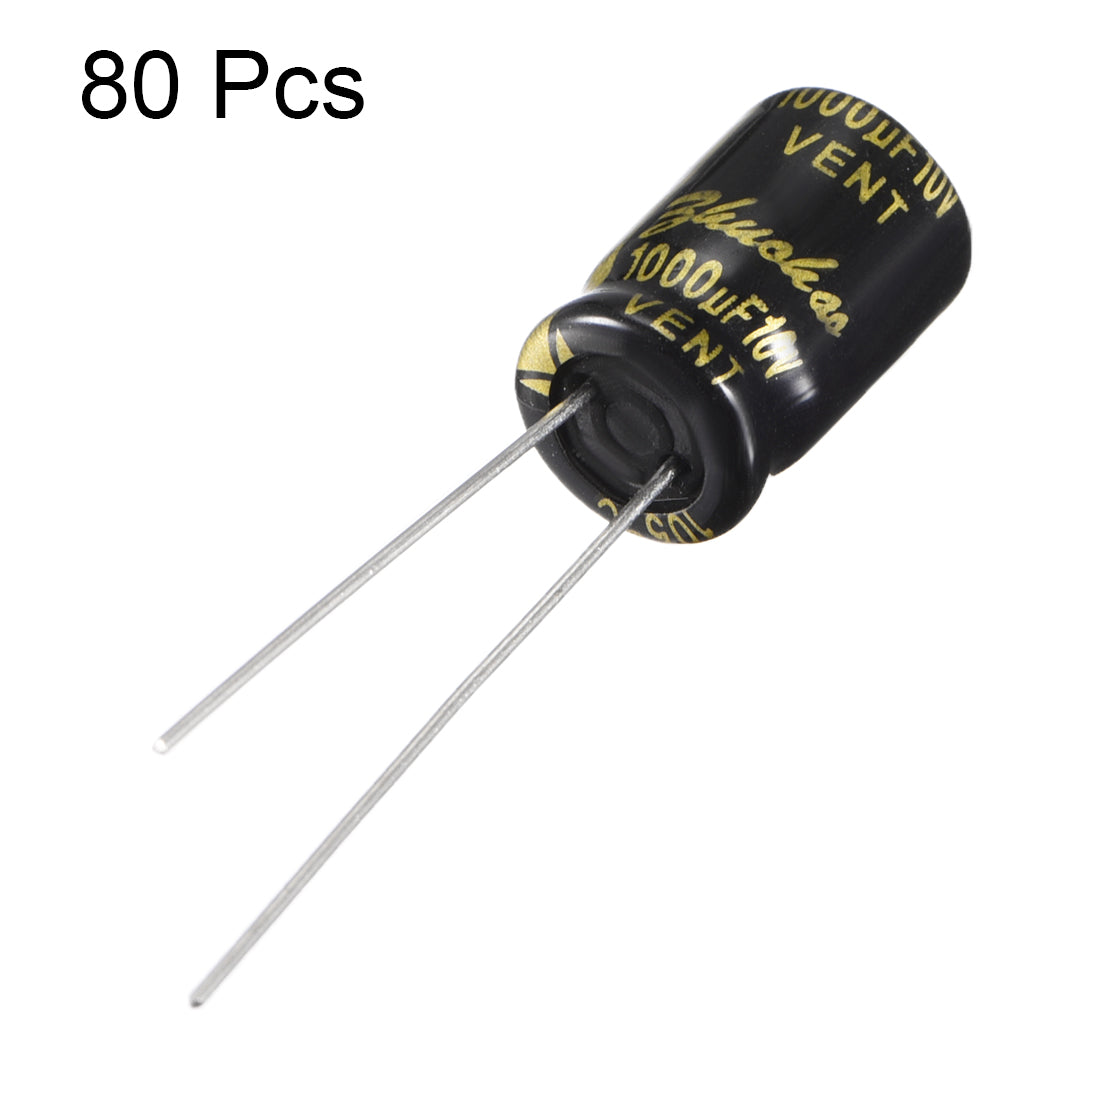 uxcell Uxcell Aluminum Radial Electrolytic Capacitor with 1000uF 10V 105 Celsius Life 2000H 8 x 12 mm Black 80pcs